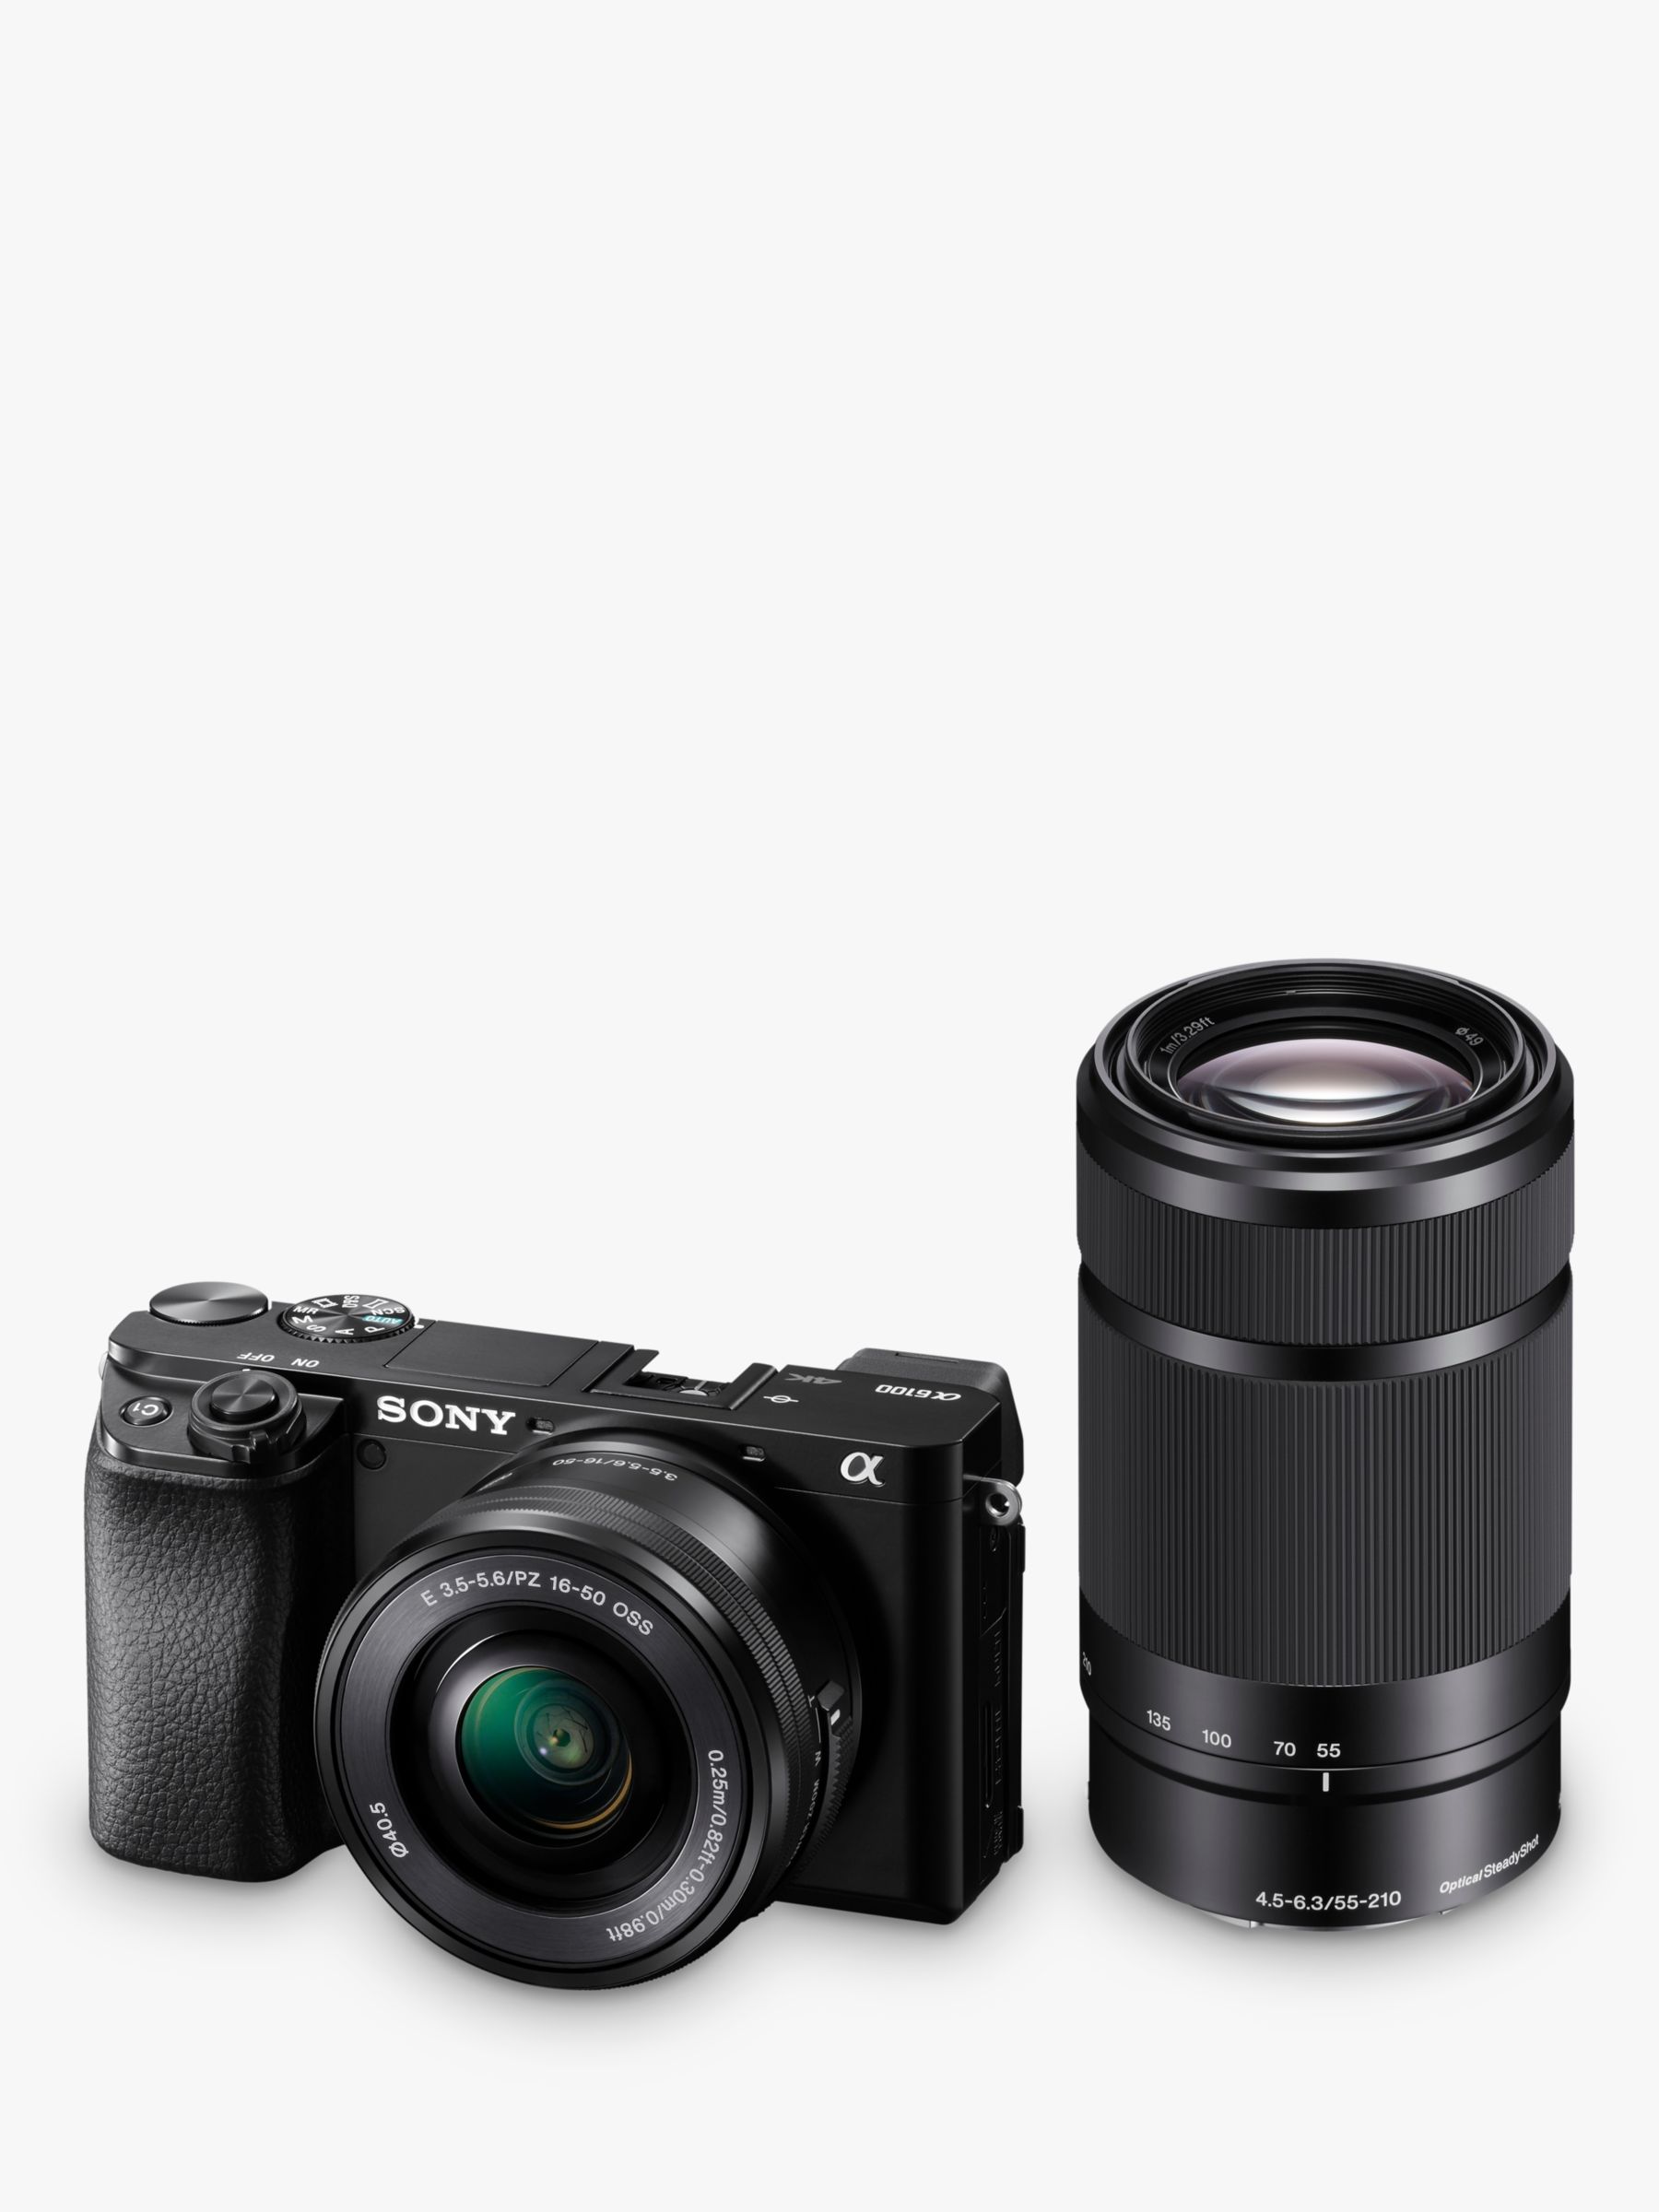 Sony A6100 Compact System Camera with 16-50mm OSS Lens & 55-210mm OSS Lens, 4K Ultra HD, 24.2MP, Wi-Fi